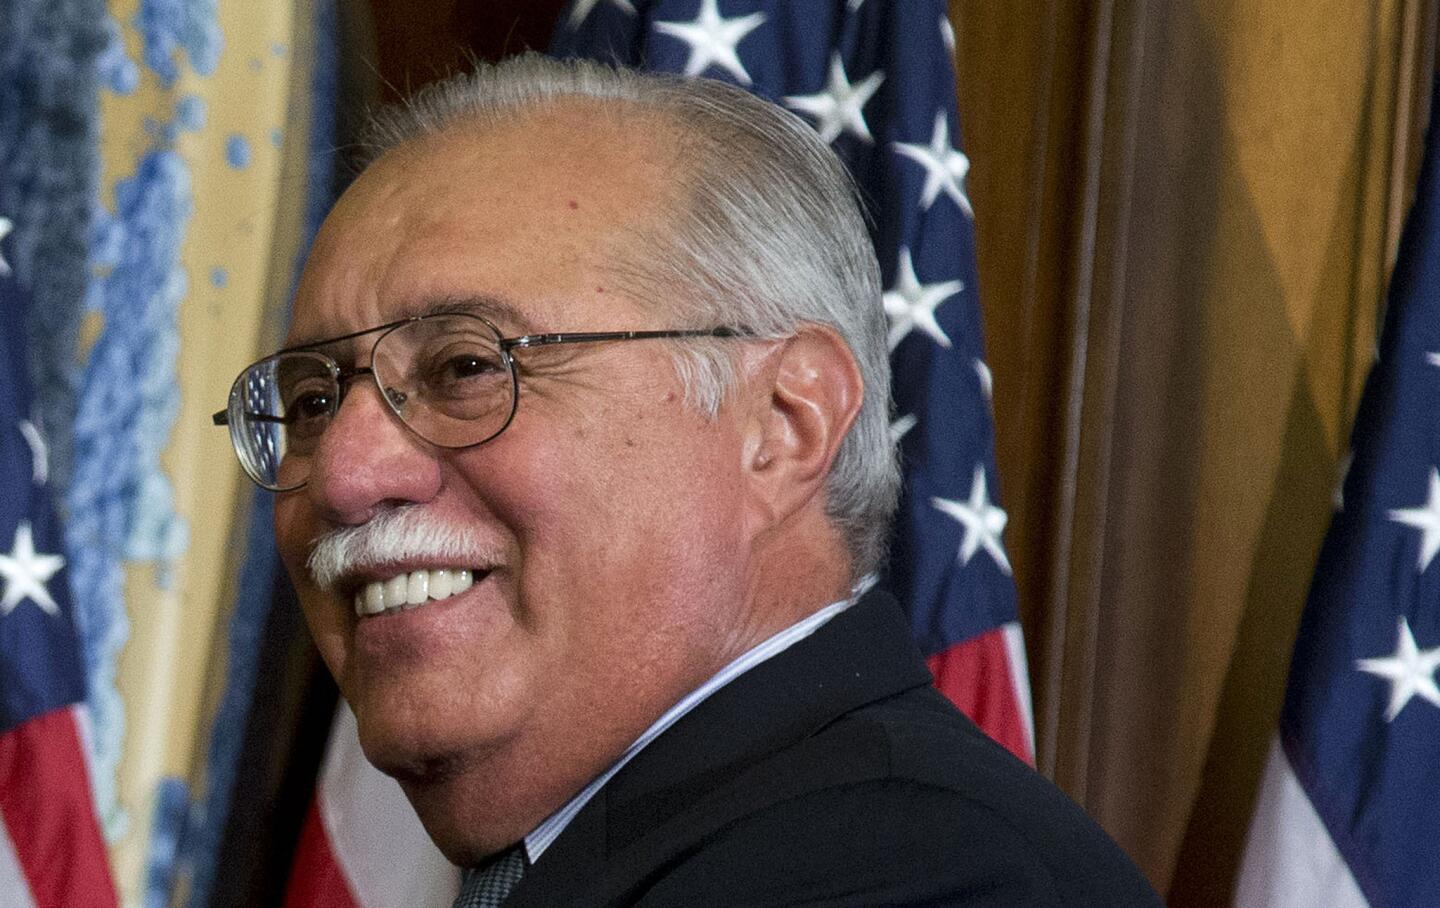 After 23 years in the House, Rep. Ed Pastor (D-Ariz.) announced Feb. 27 that he plans to retire at the end of his current term. First elected in 1991, Pastor became the state's first Latino representative.